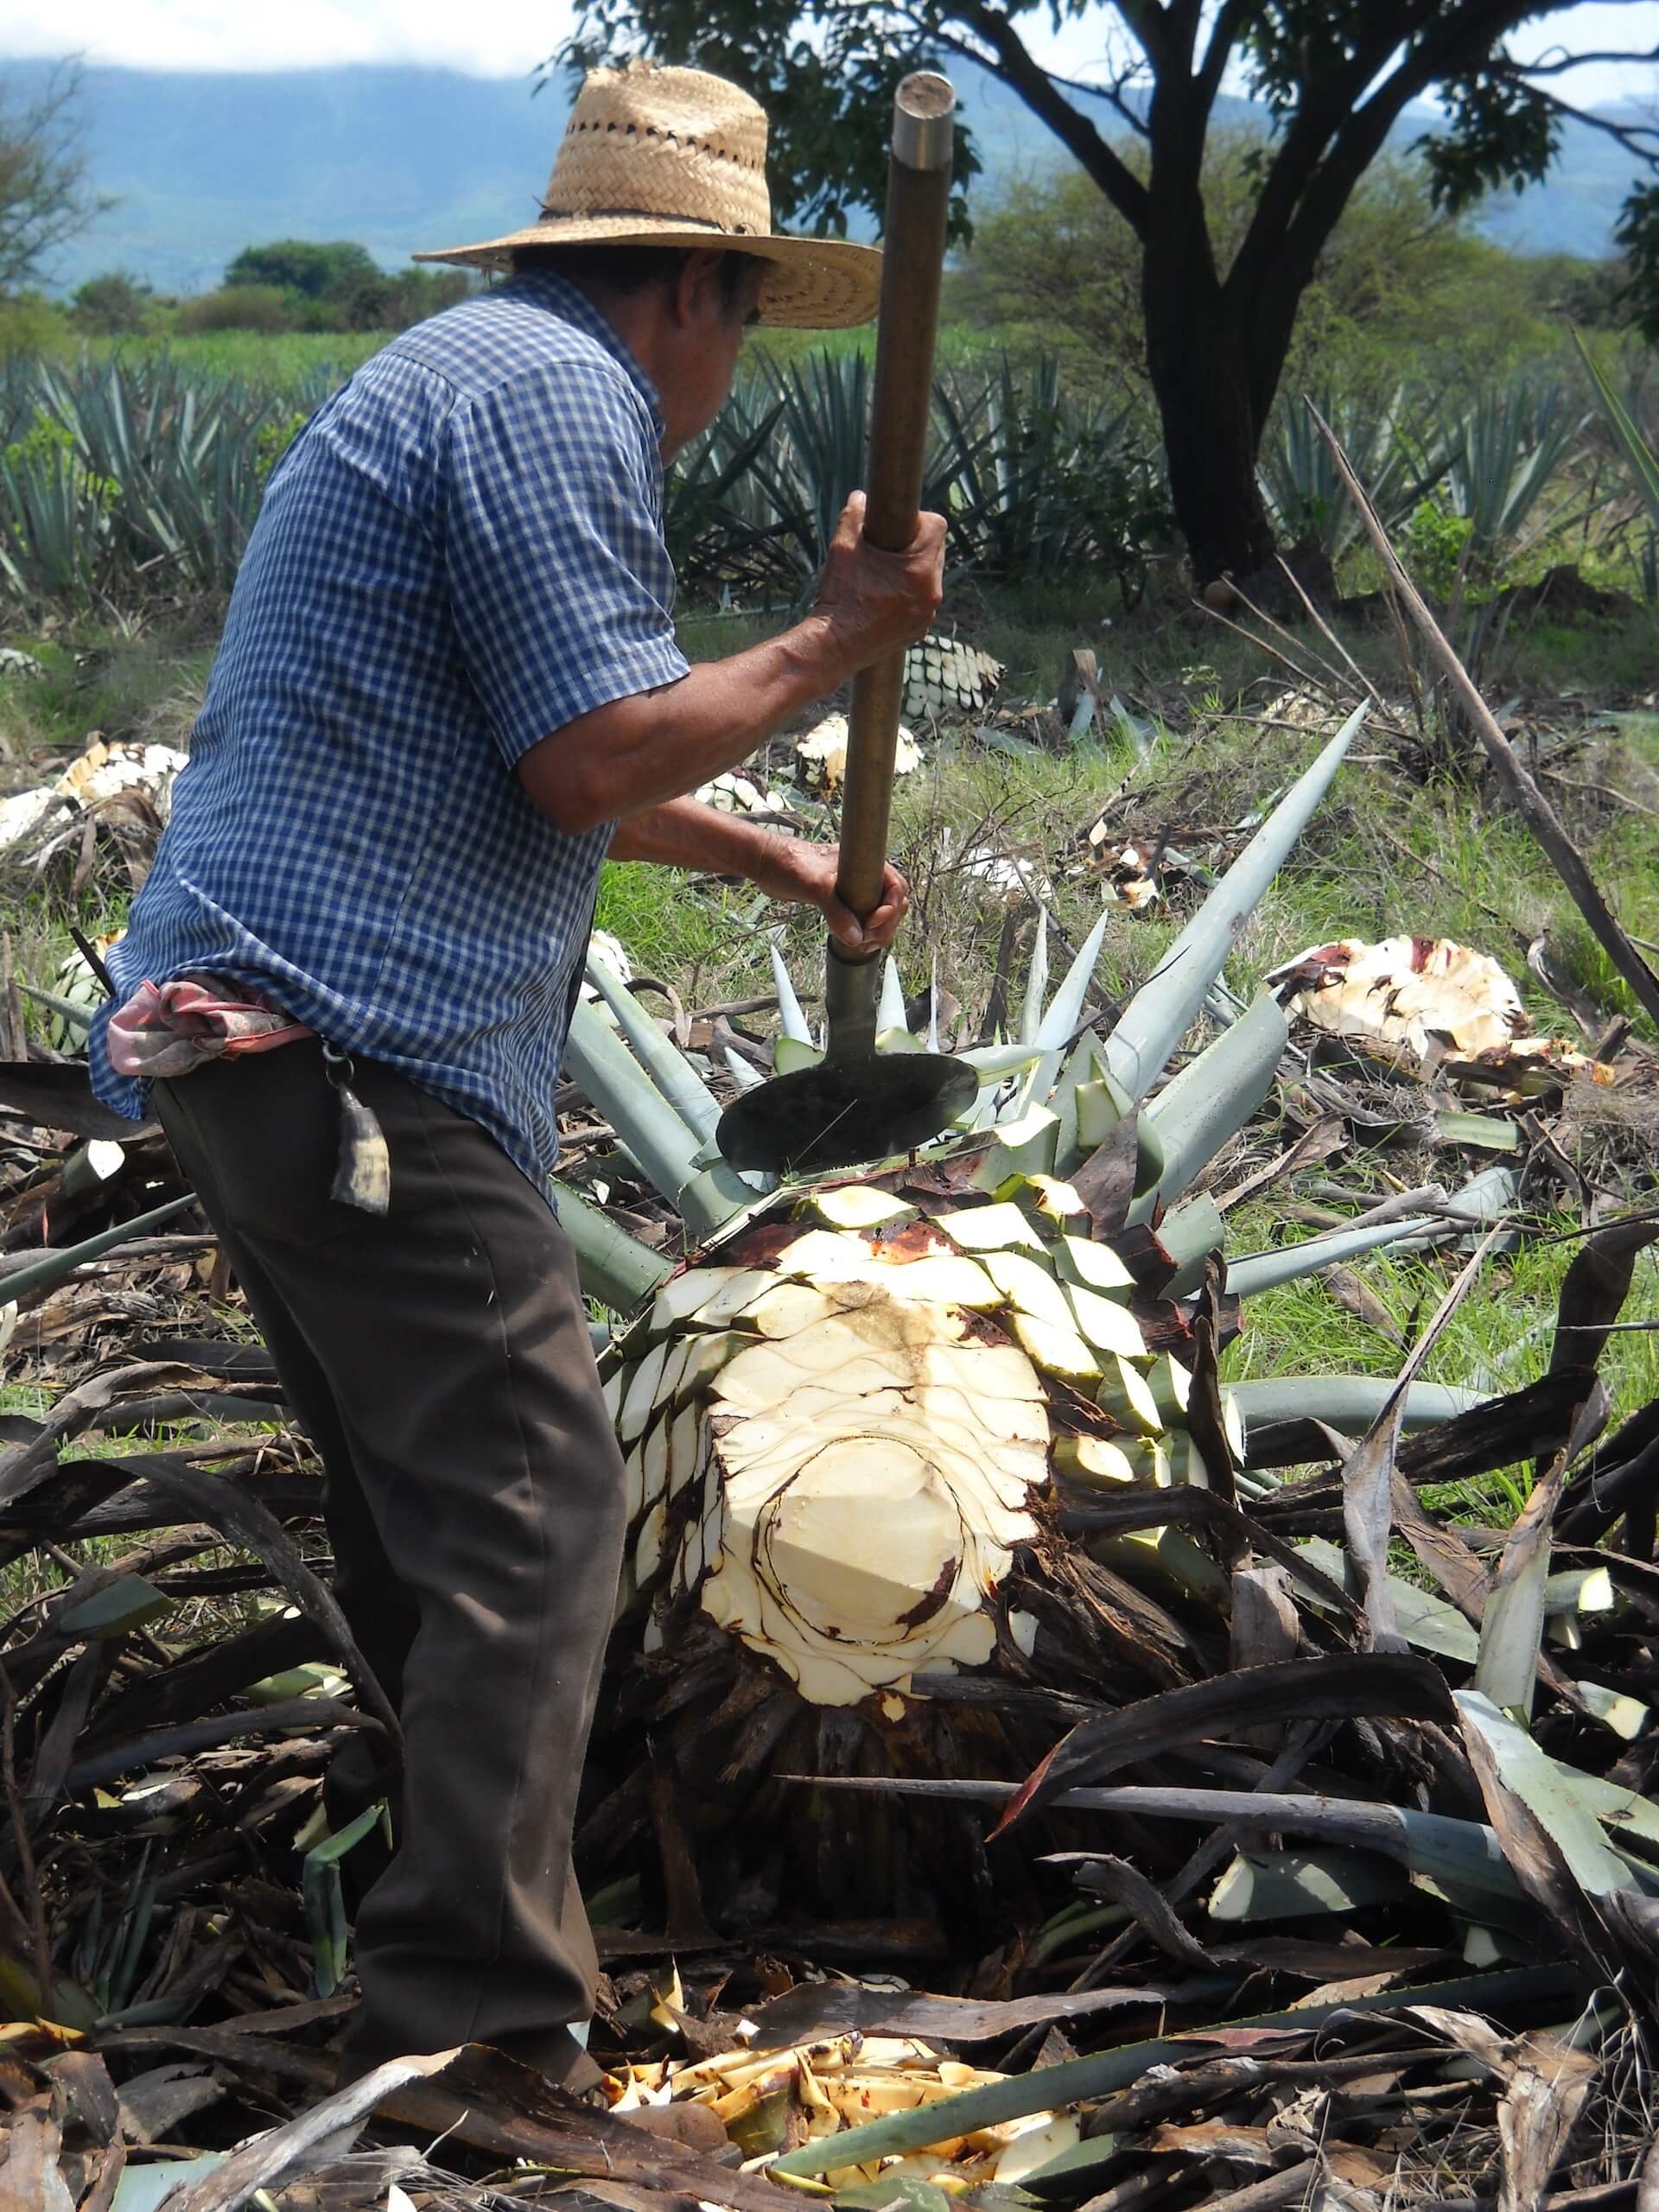 Harvesting agave plant for tequila